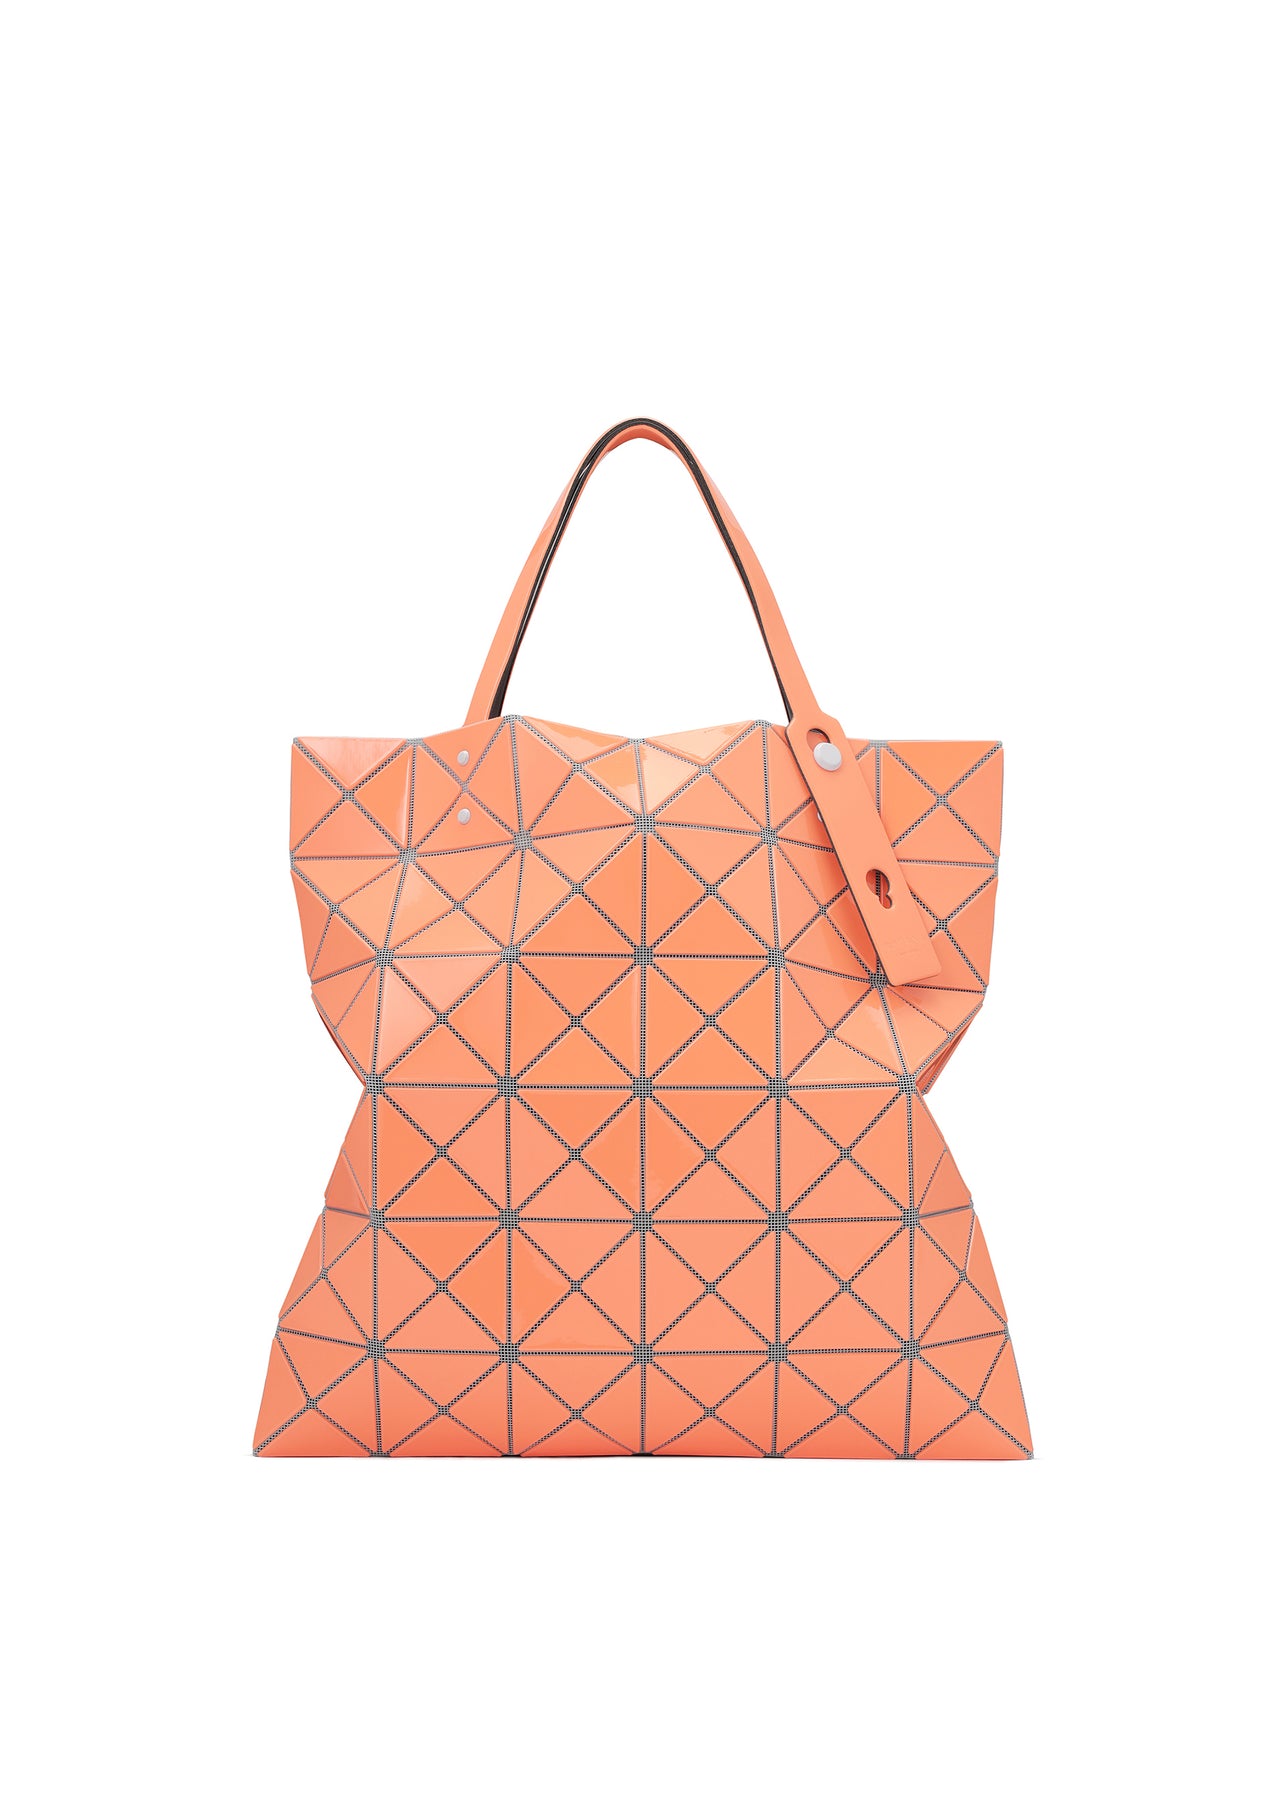 LUCENT GLOSS TOTE BAG | The official ISSEY MIYAKE ONLINE STORE 